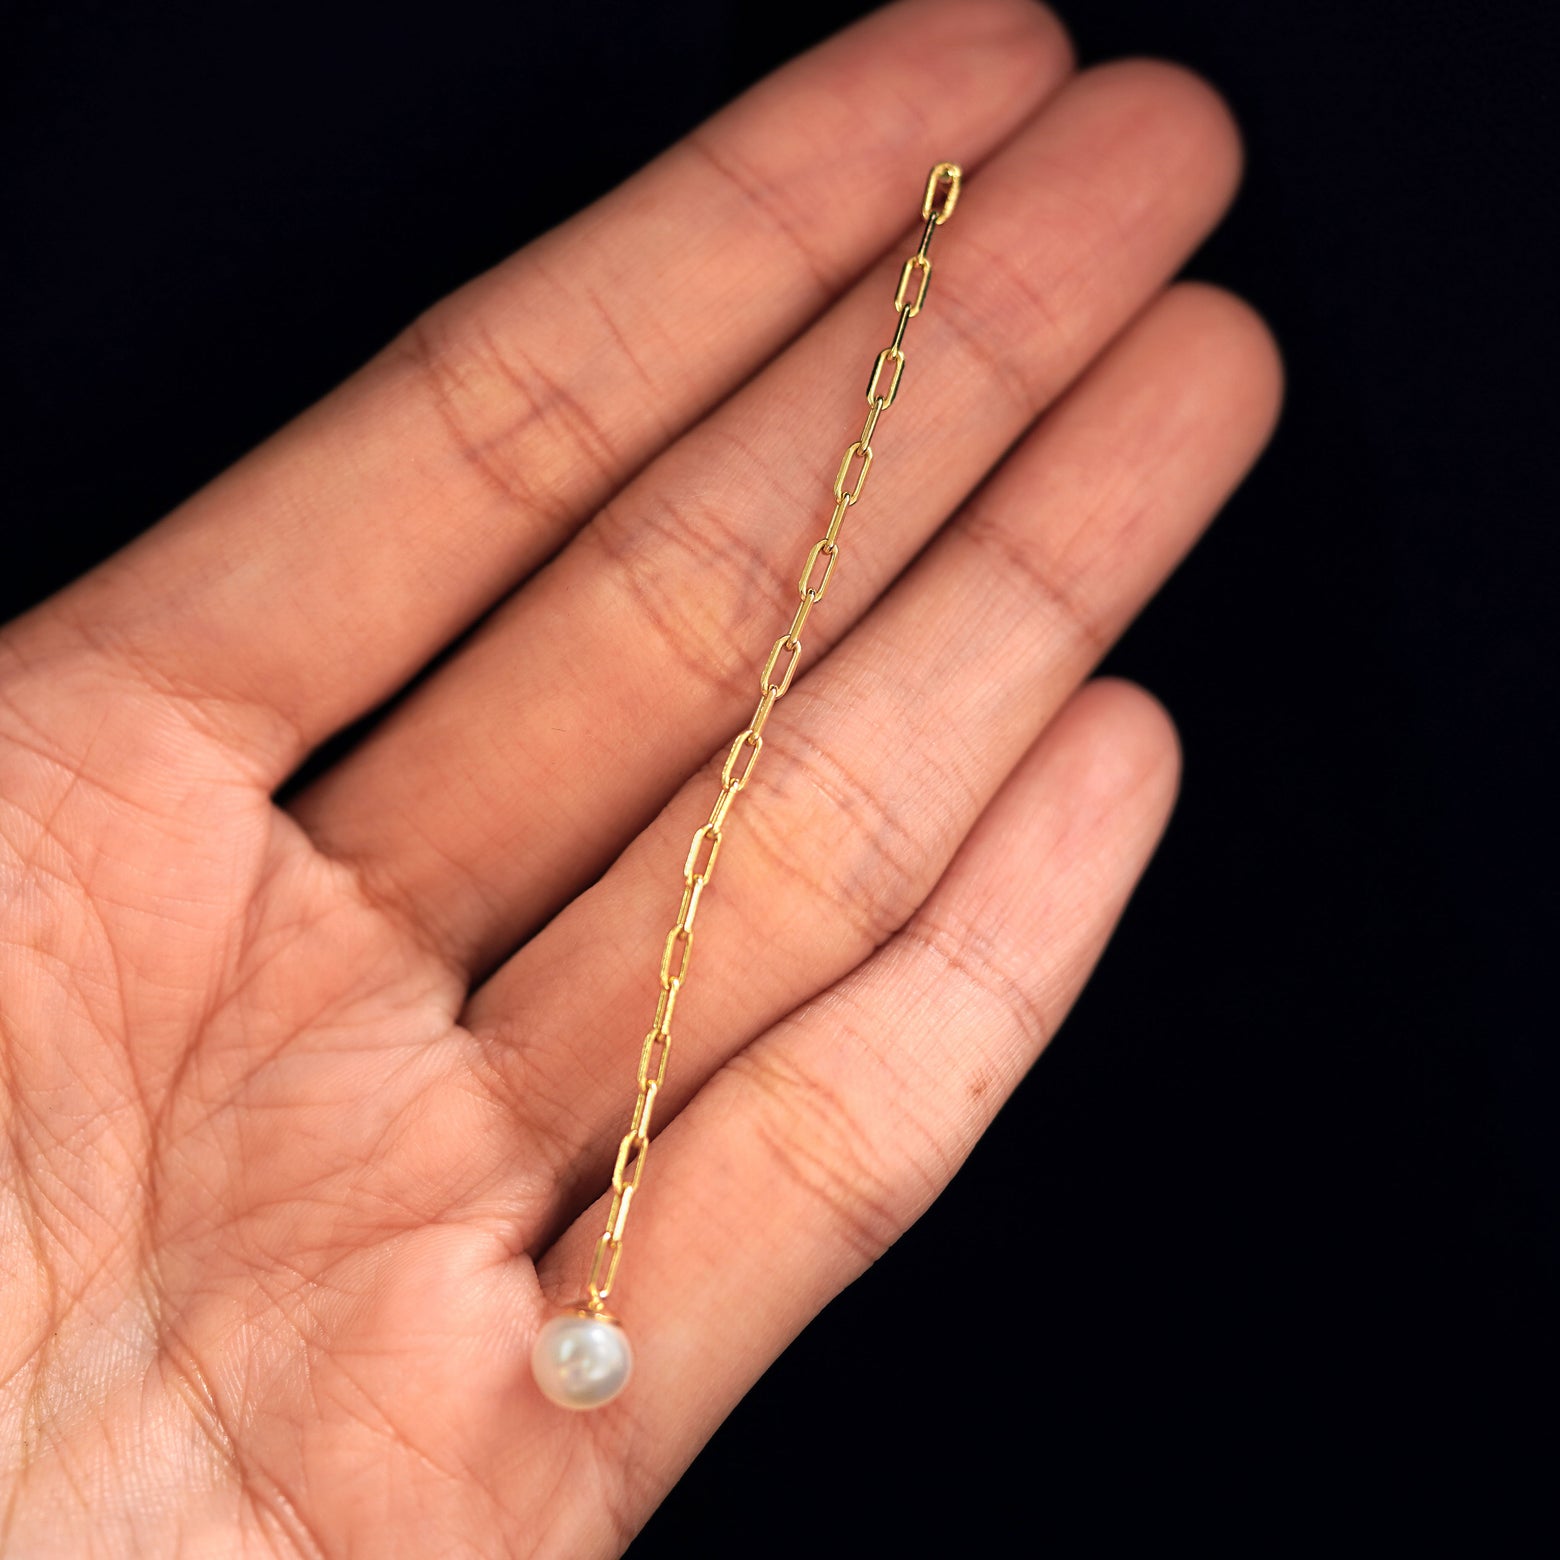 A 14k gold Pearl Dangle Earring held between a model's fingers to show the length of the butch chain